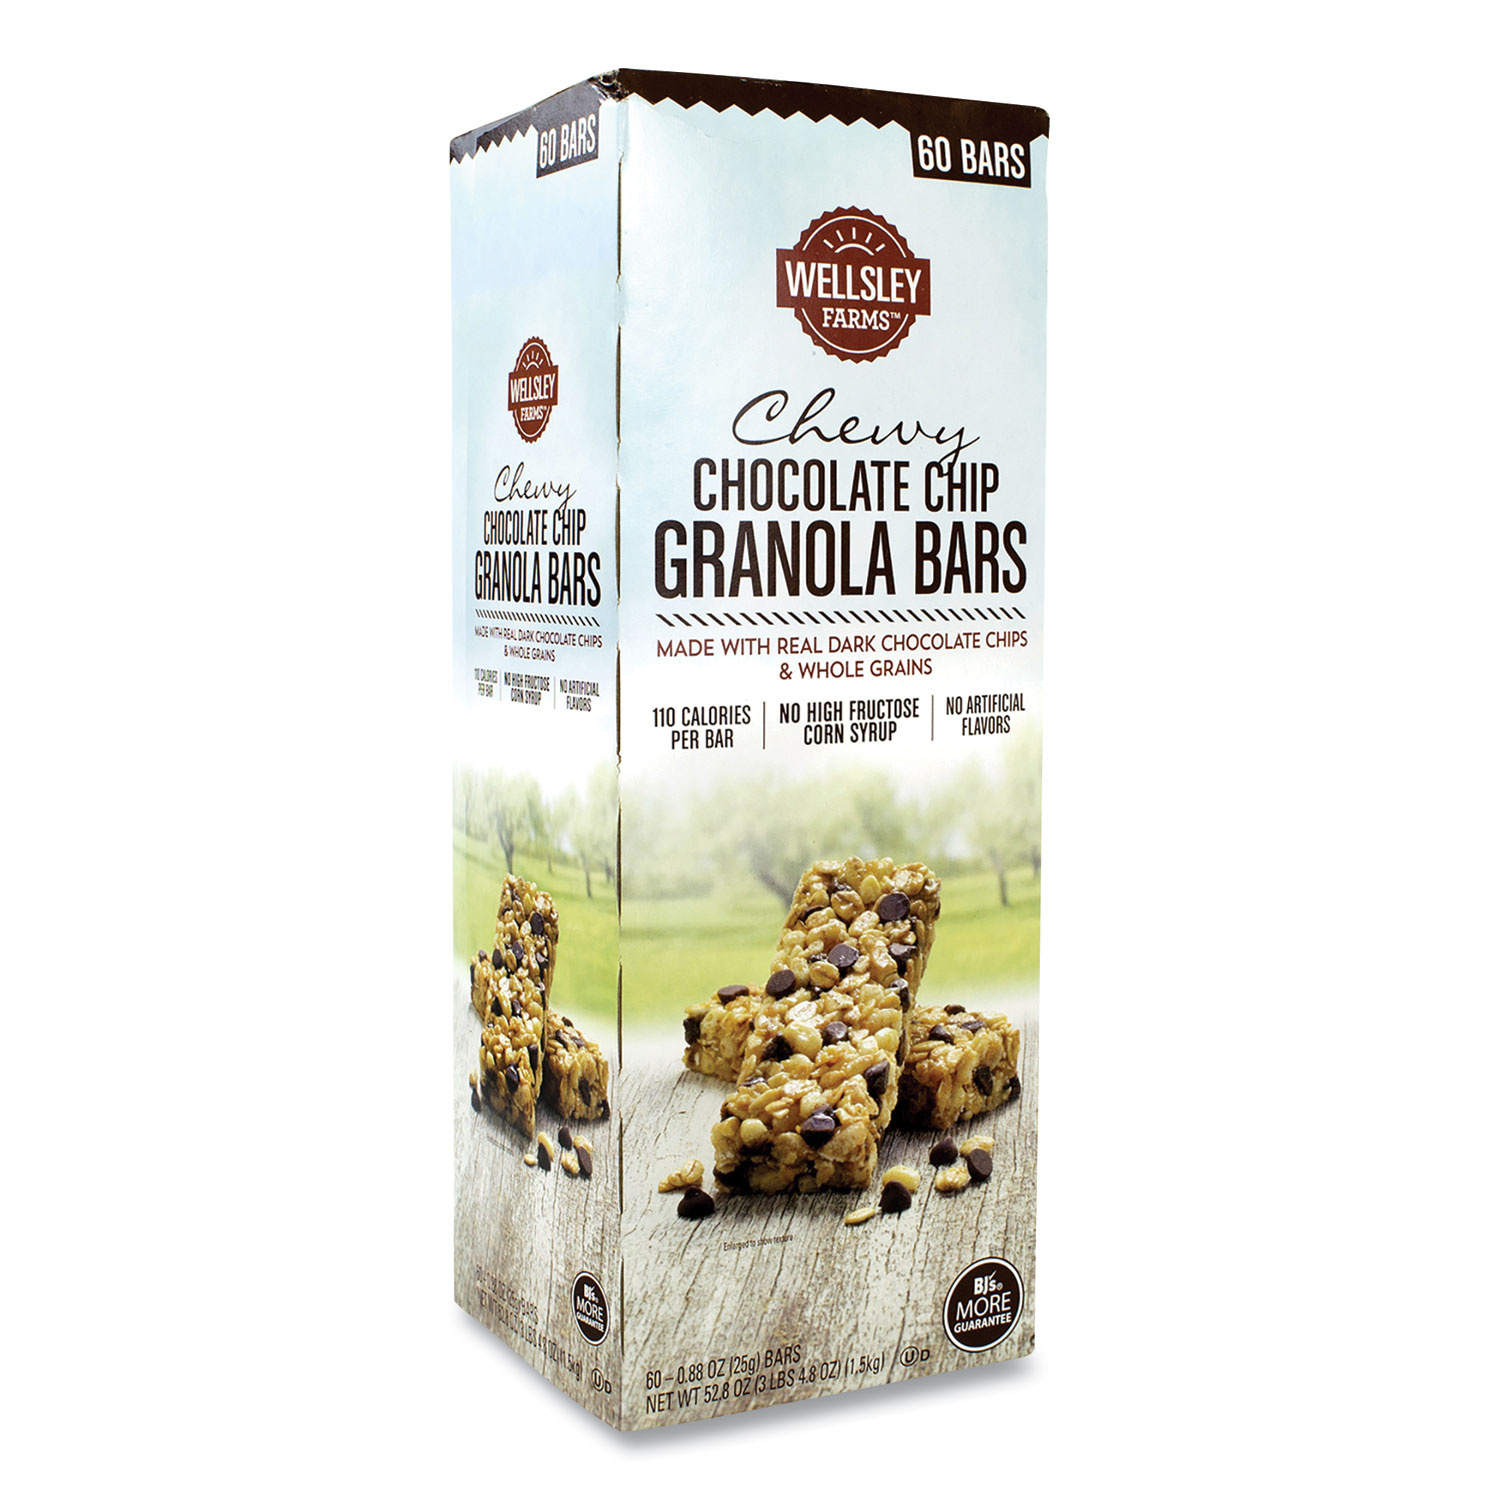  Wellsley Farms 2552 Chewy Chocolate Chip Granola Bars, 0.88 oz Bar, 60 Bars/Box, Free Delivery in 1-4 Business Days (GRR22000538) 